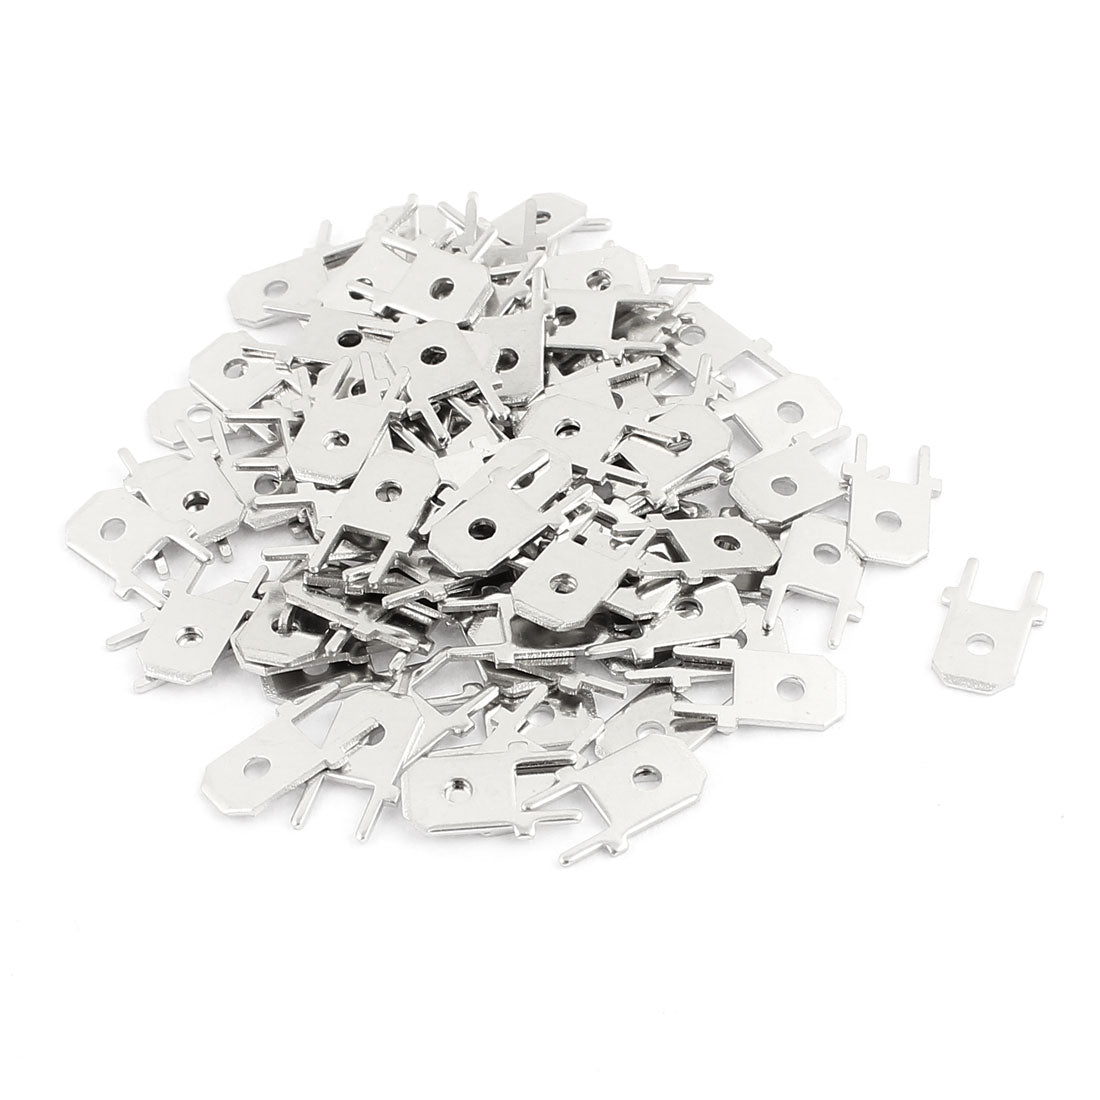 uxcell Uxcell 100 Pcs 1/4" Dia Male Insulated Crimp Spade PCB Male Terminal Fasten Connector